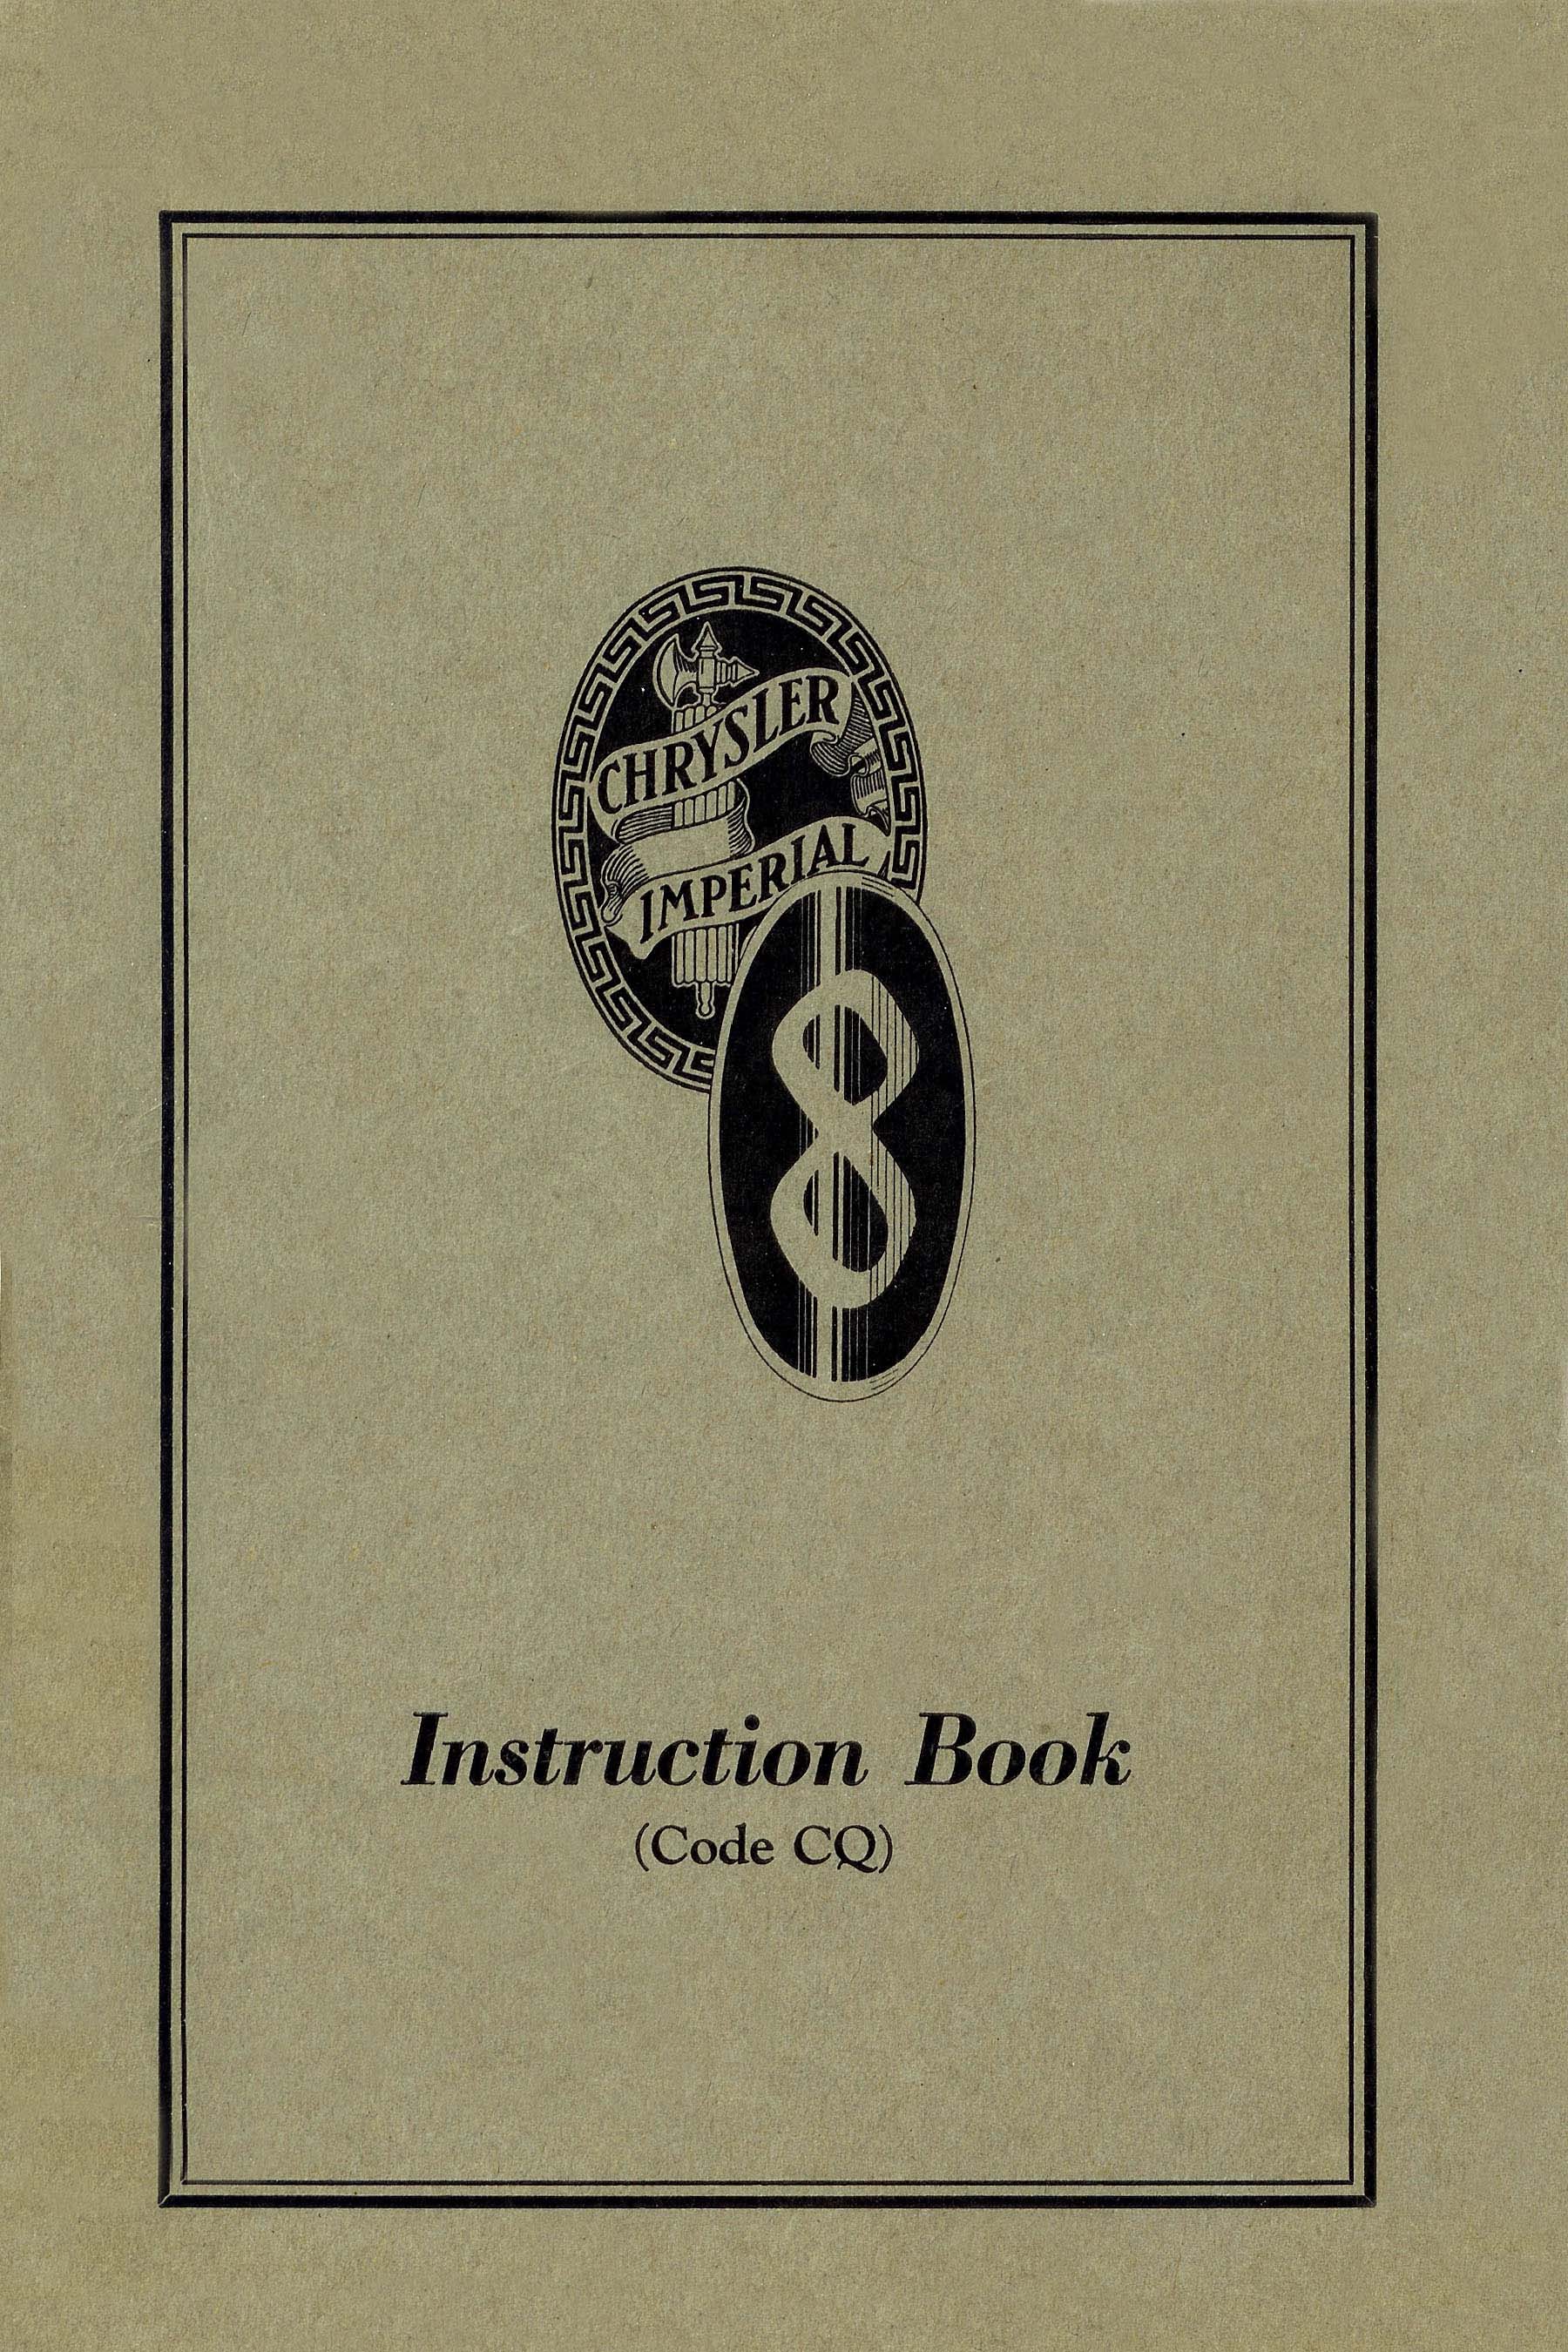 1933 Imperial Instruction Book-001